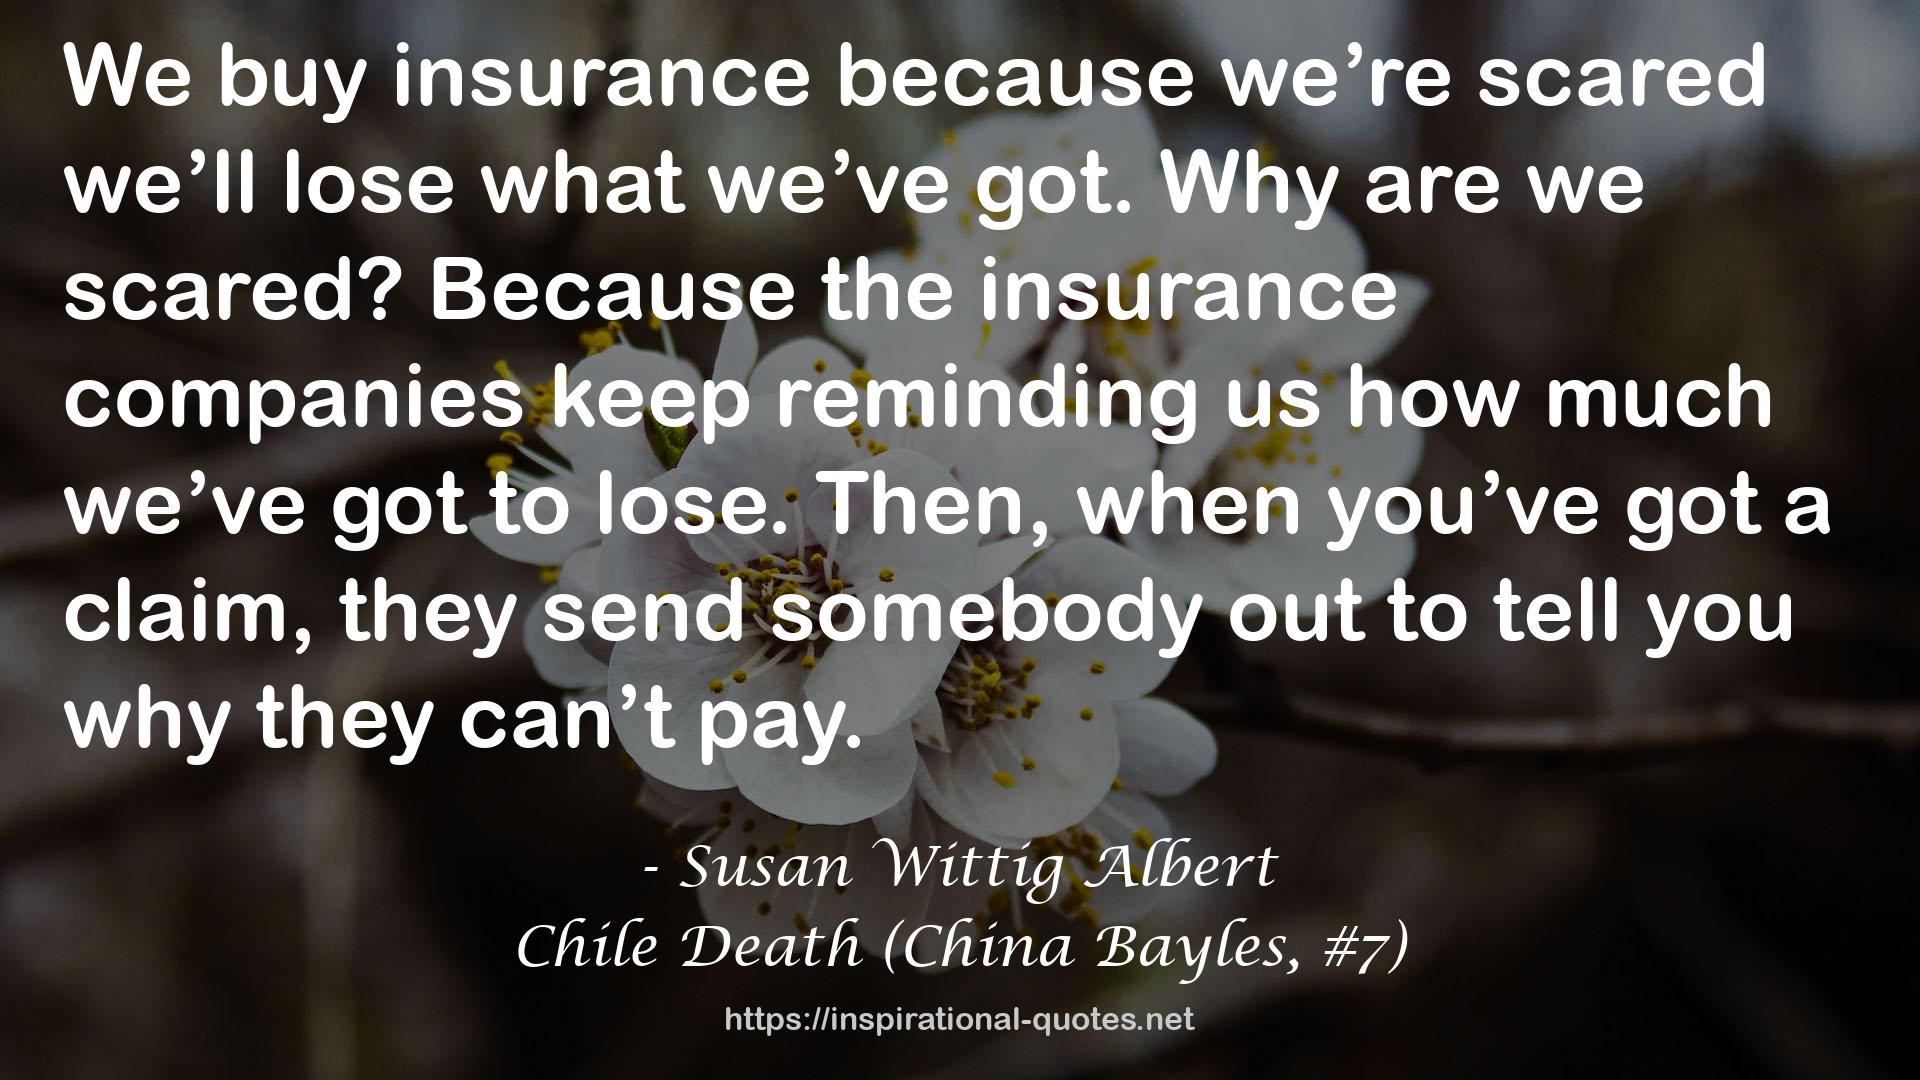 Chile Death (China Bayles, #7) QUOTES